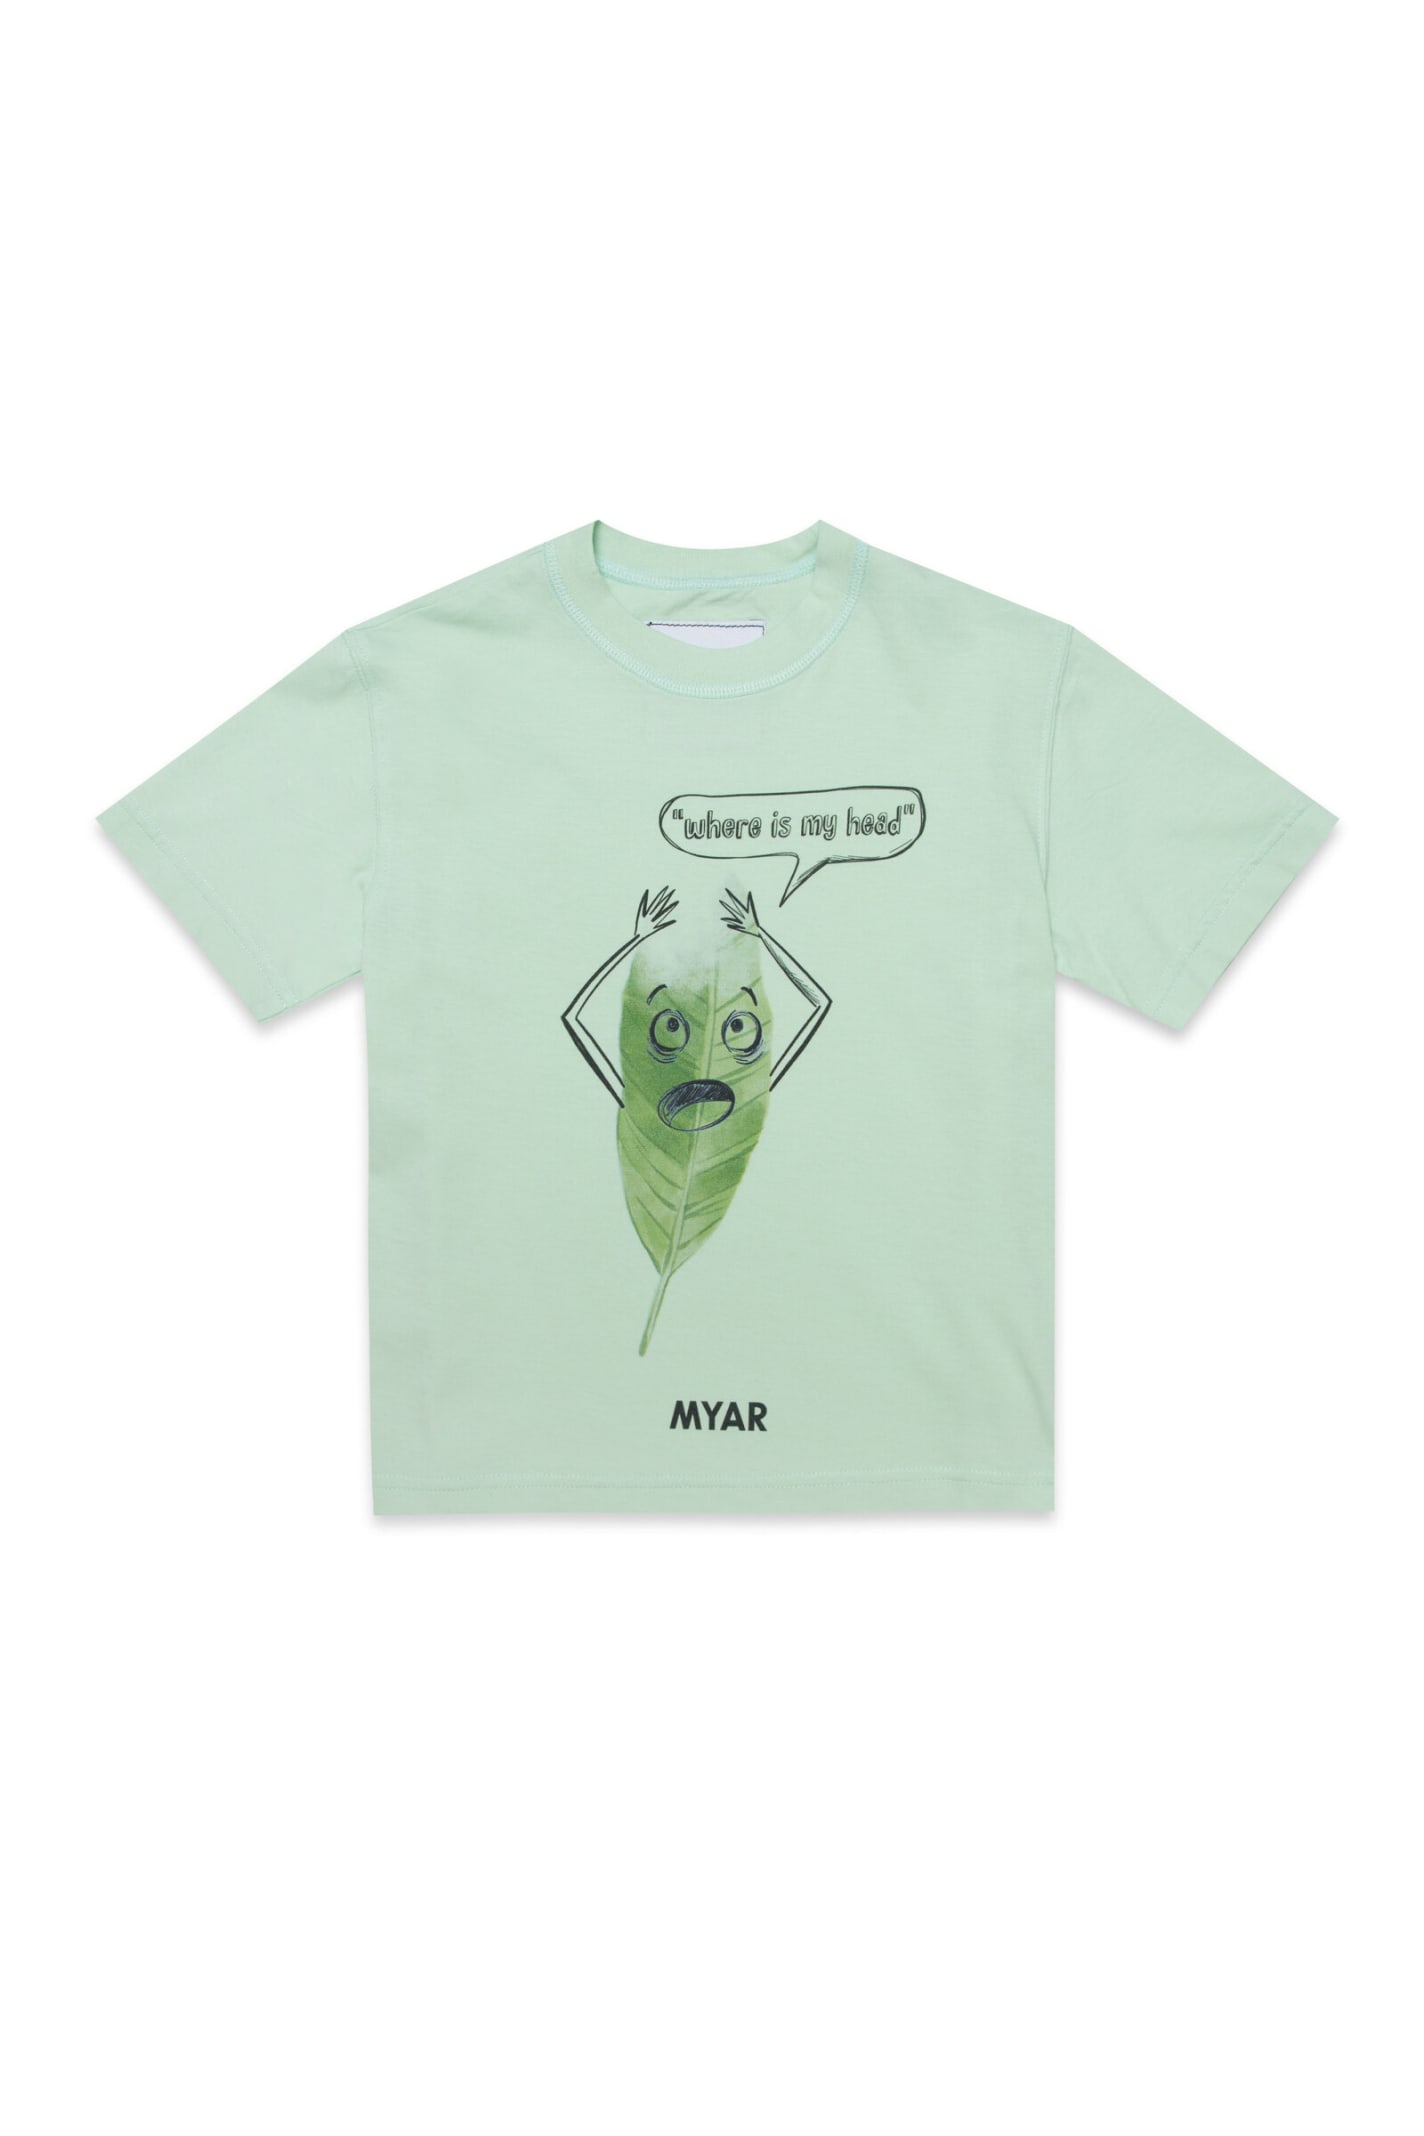 MYAR Myt22u T-shirt Myar Crew-neck T-shirt In Deadstock Green Fabric With Digital Print On The Front